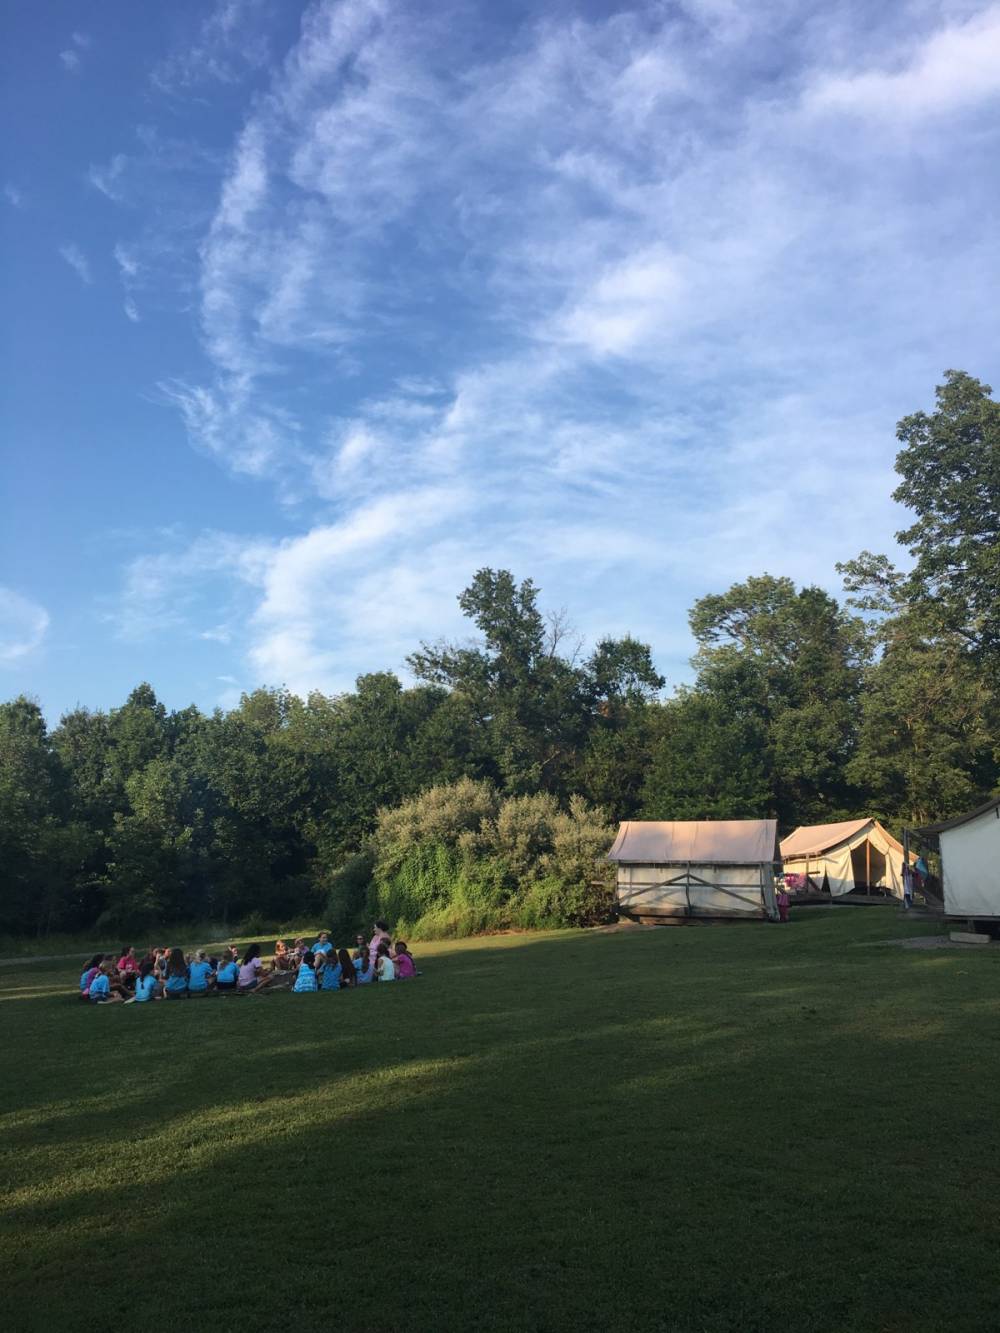 TOP NEW JERSEY THEATER CAMP: Camp Agnes DeWitt is a Top Theater Summer Camp located in Hillsborough New Jersey offering many fun and enriching Theater and other camp programs. Camp Agnes DeWitt also offers CIT/LIT and/or Teen Leadership Opportunities, too.